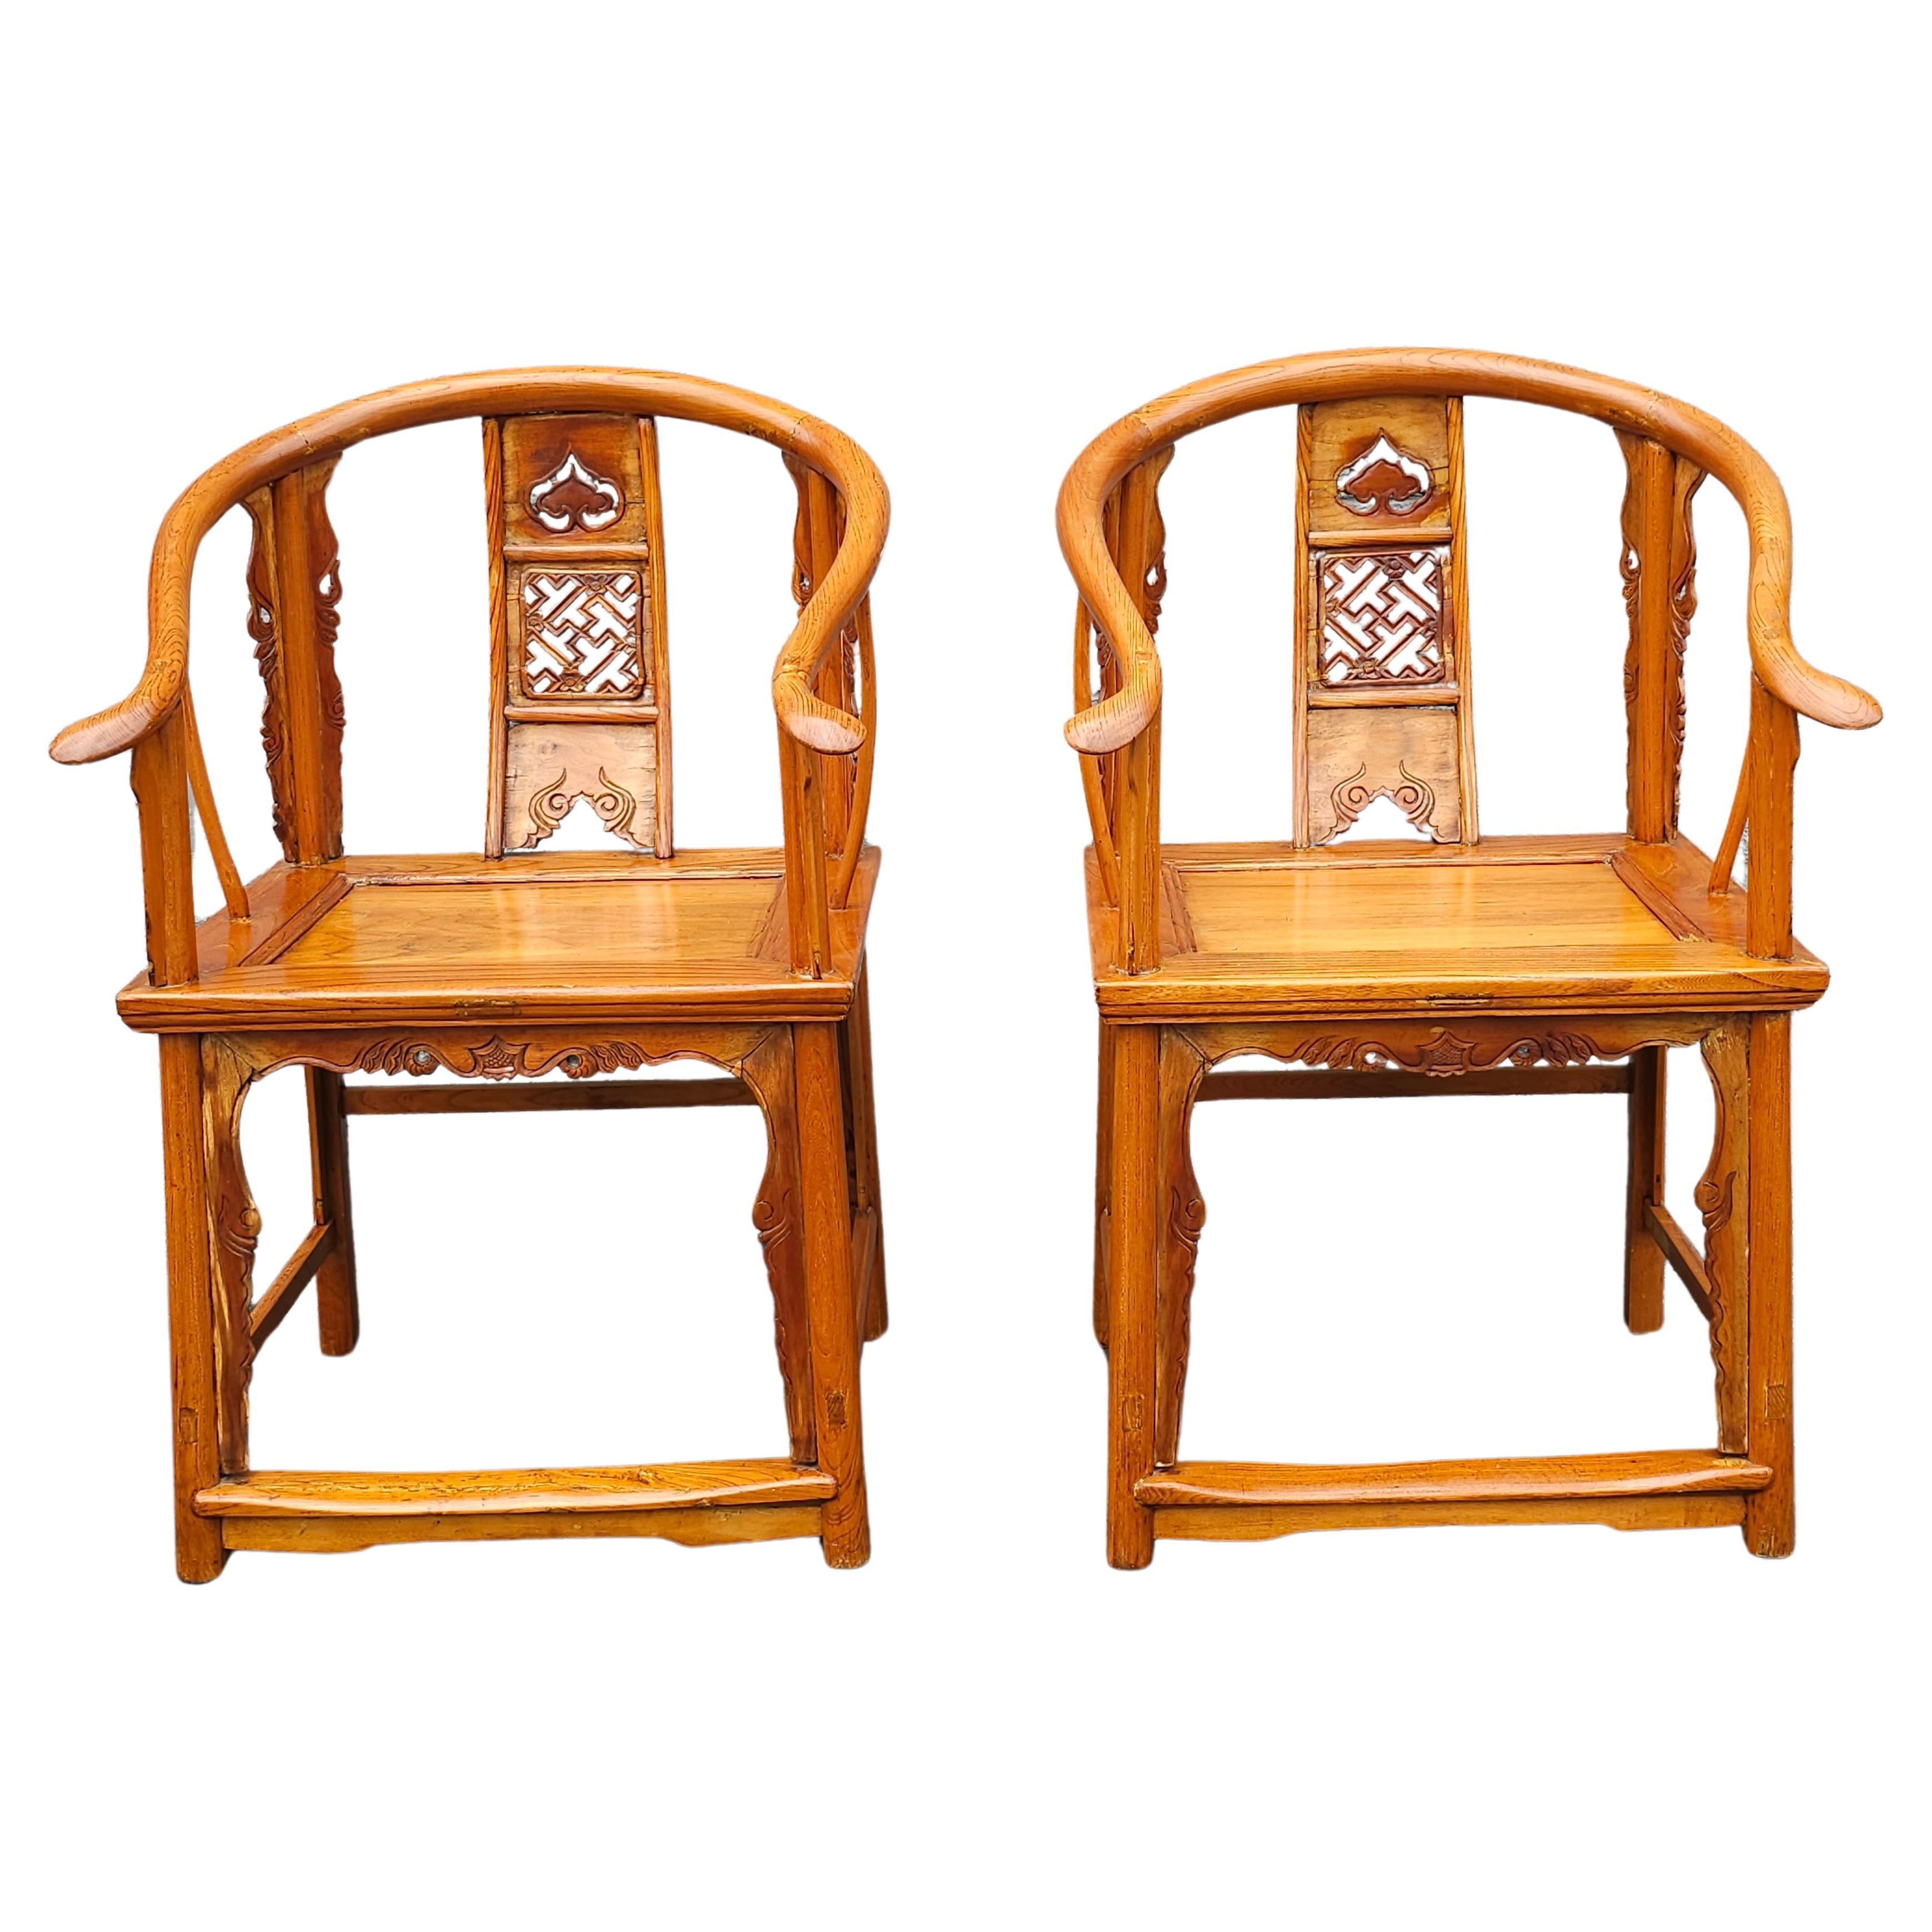 19th Century Pair Of Chinese Elmwood Horseshoe-Back Armchairs in good antique condition. Measure 25